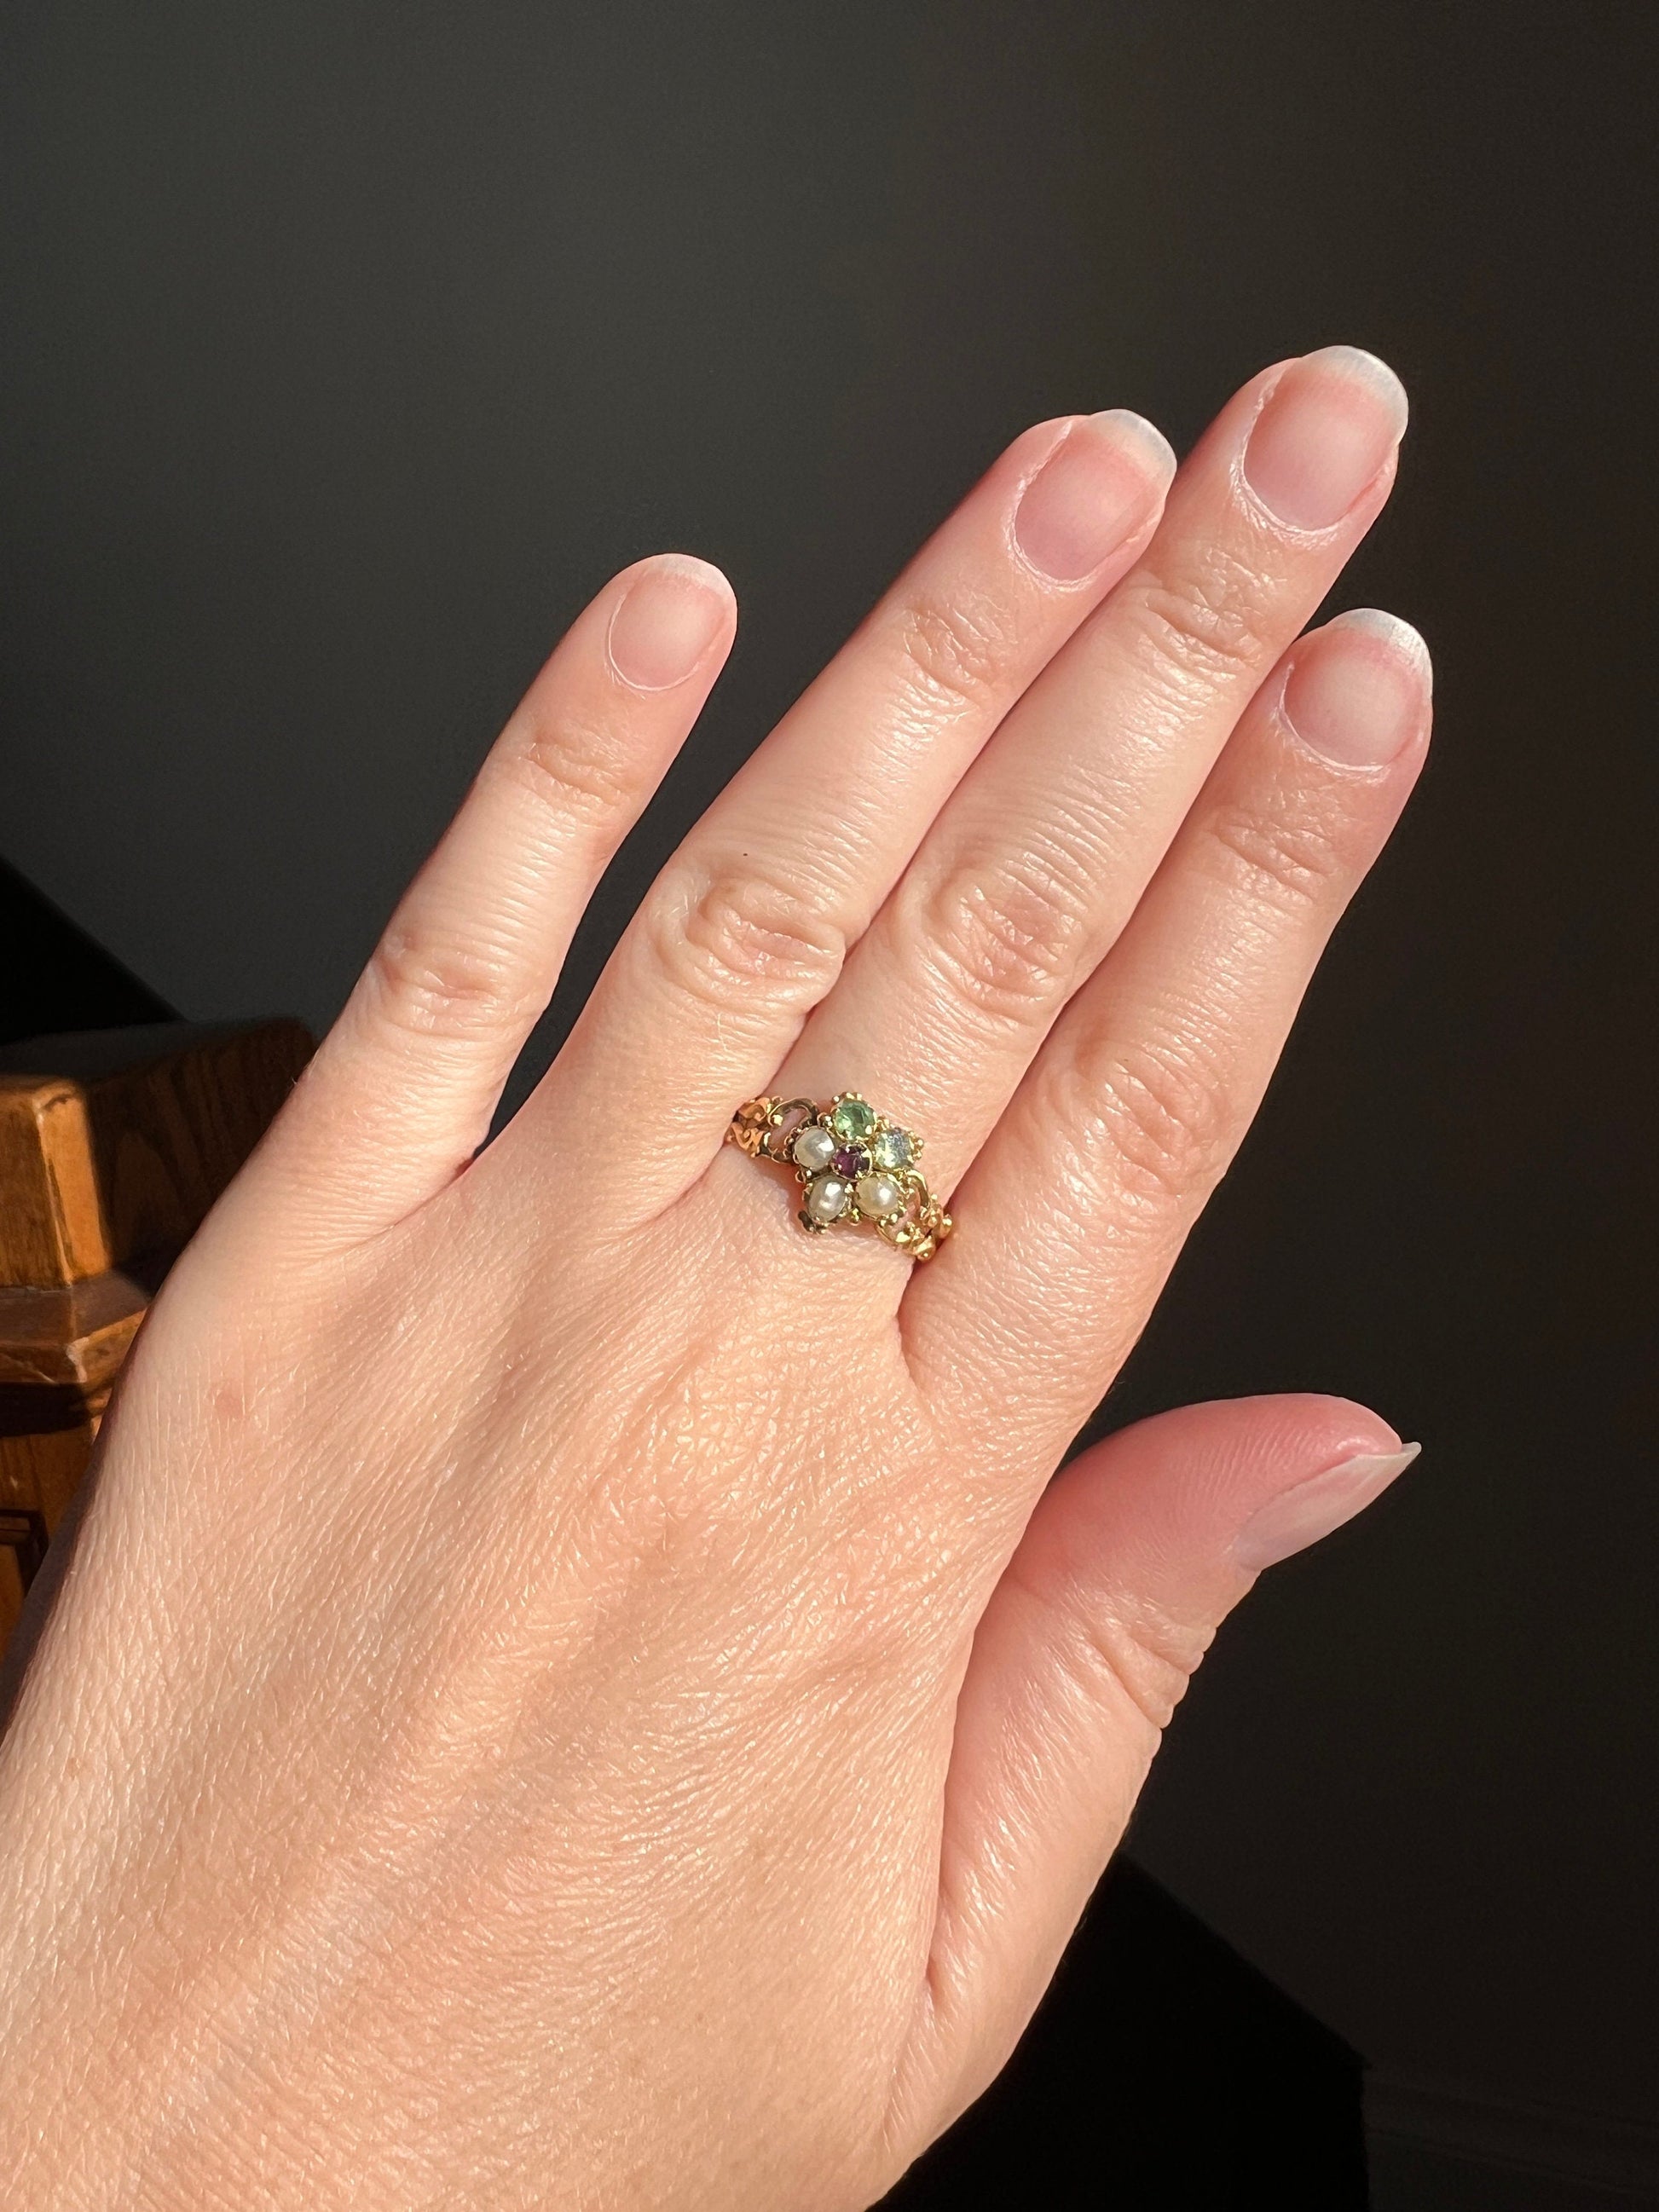 PANSY Green EMERALD Pearl RUBY Victorian to Georgian Antique Figural Floral Ring 15k Gold Flower Love Romantic Gift Stacker Not 14k Ornate